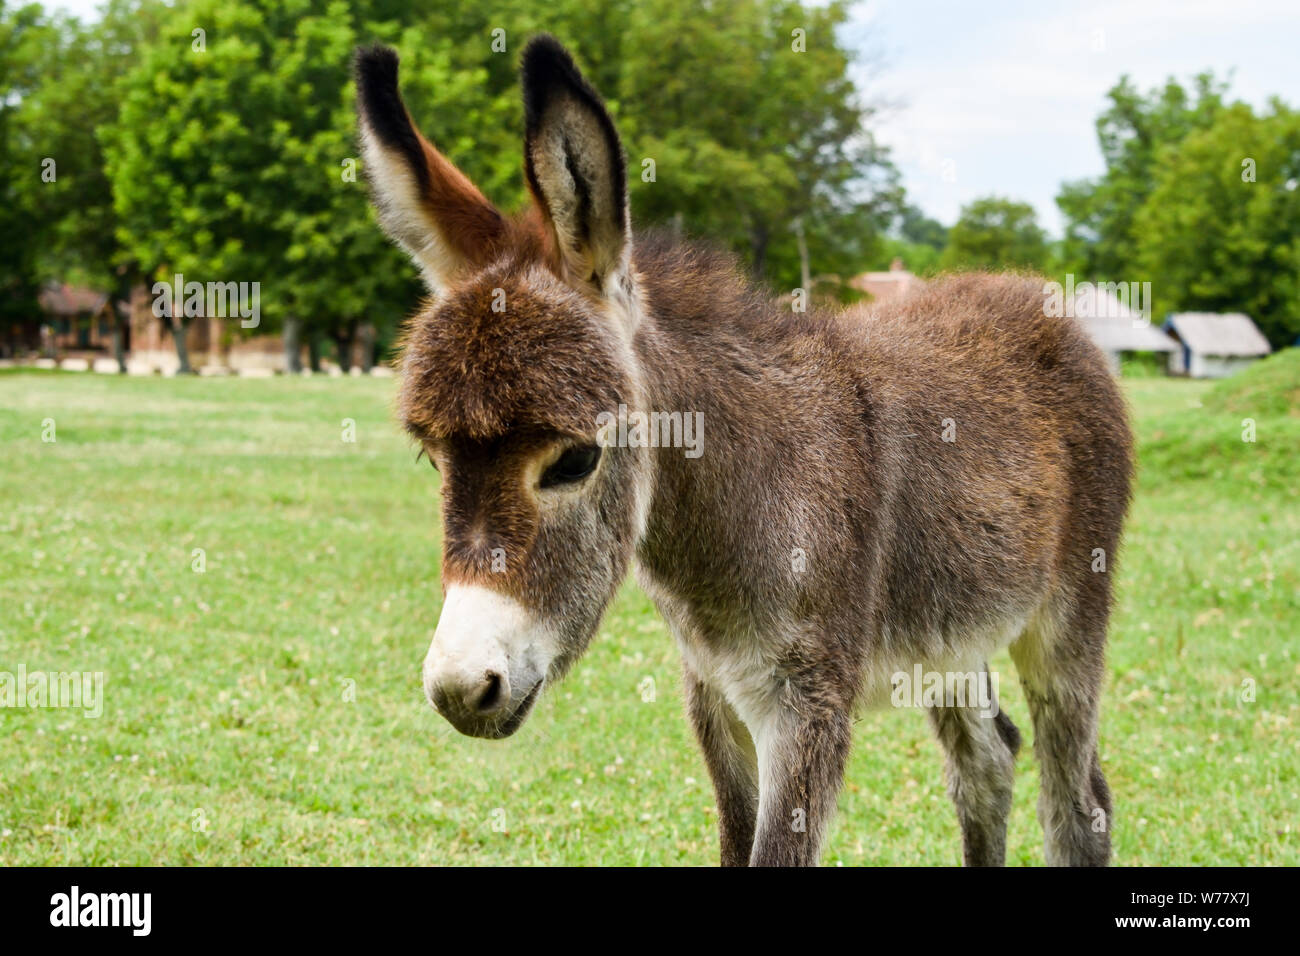 Baby donkey standing on field. Stock Photo